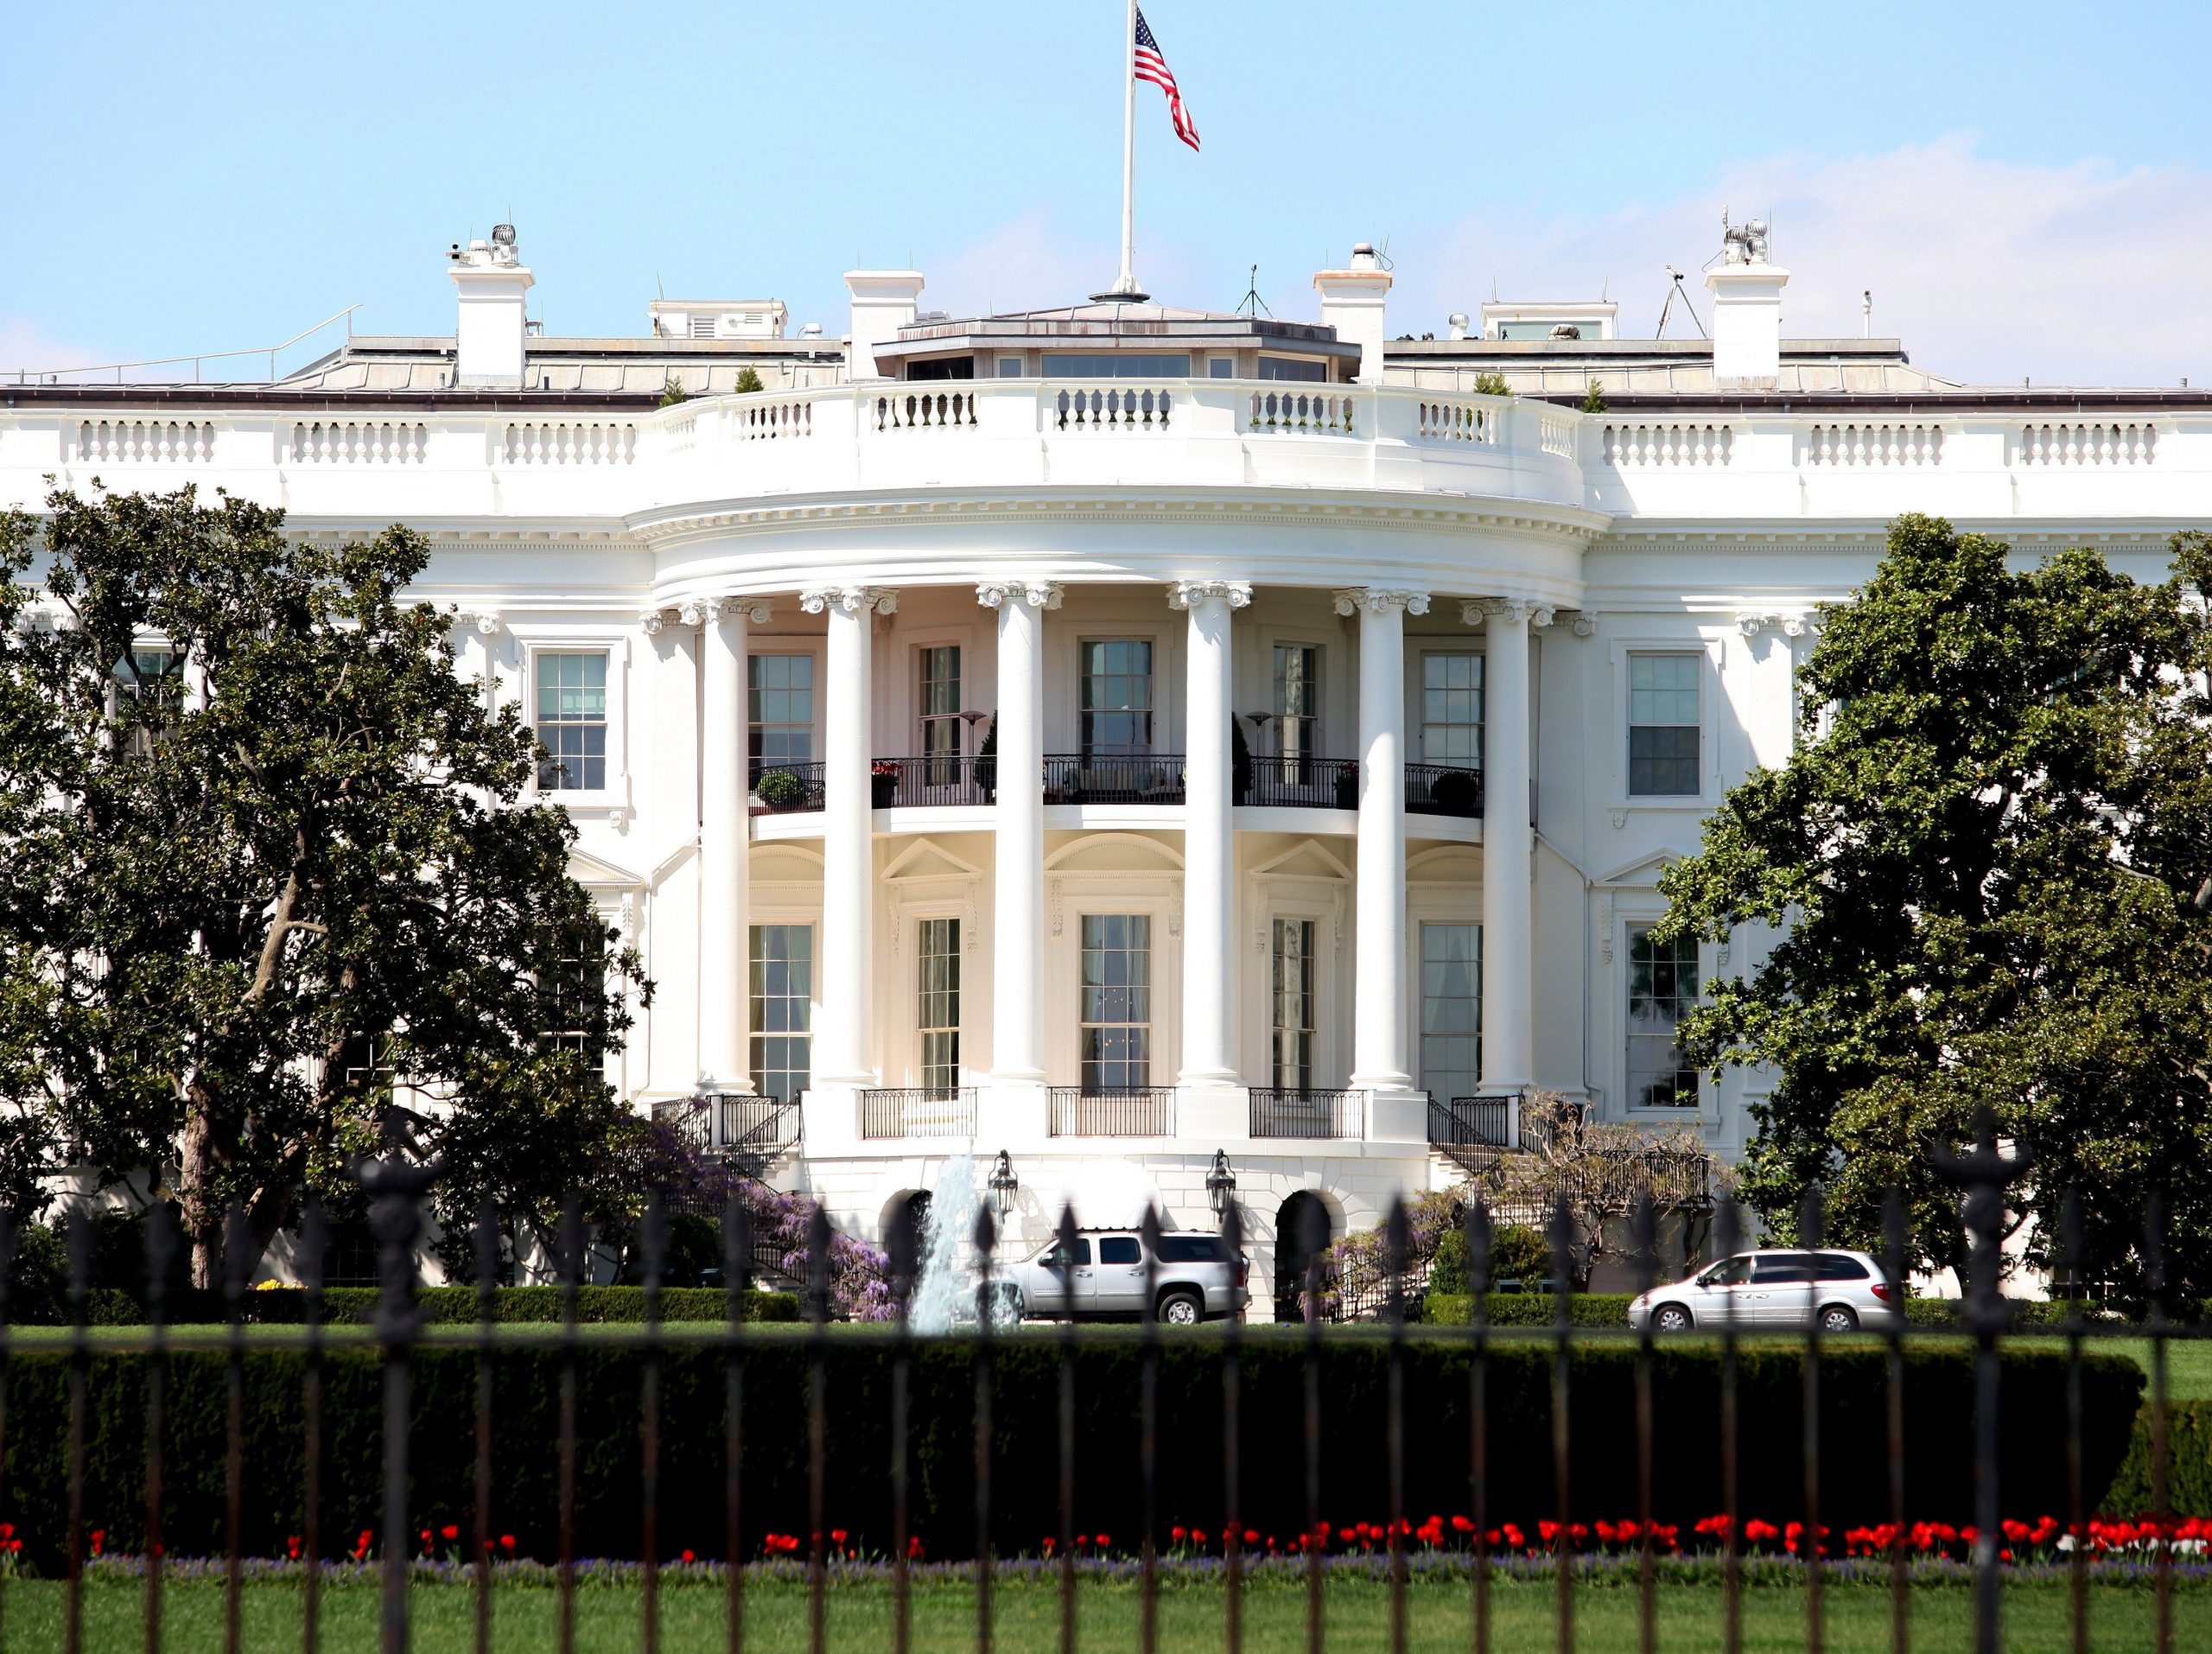 A picture of The White House, with a flag flying above it.